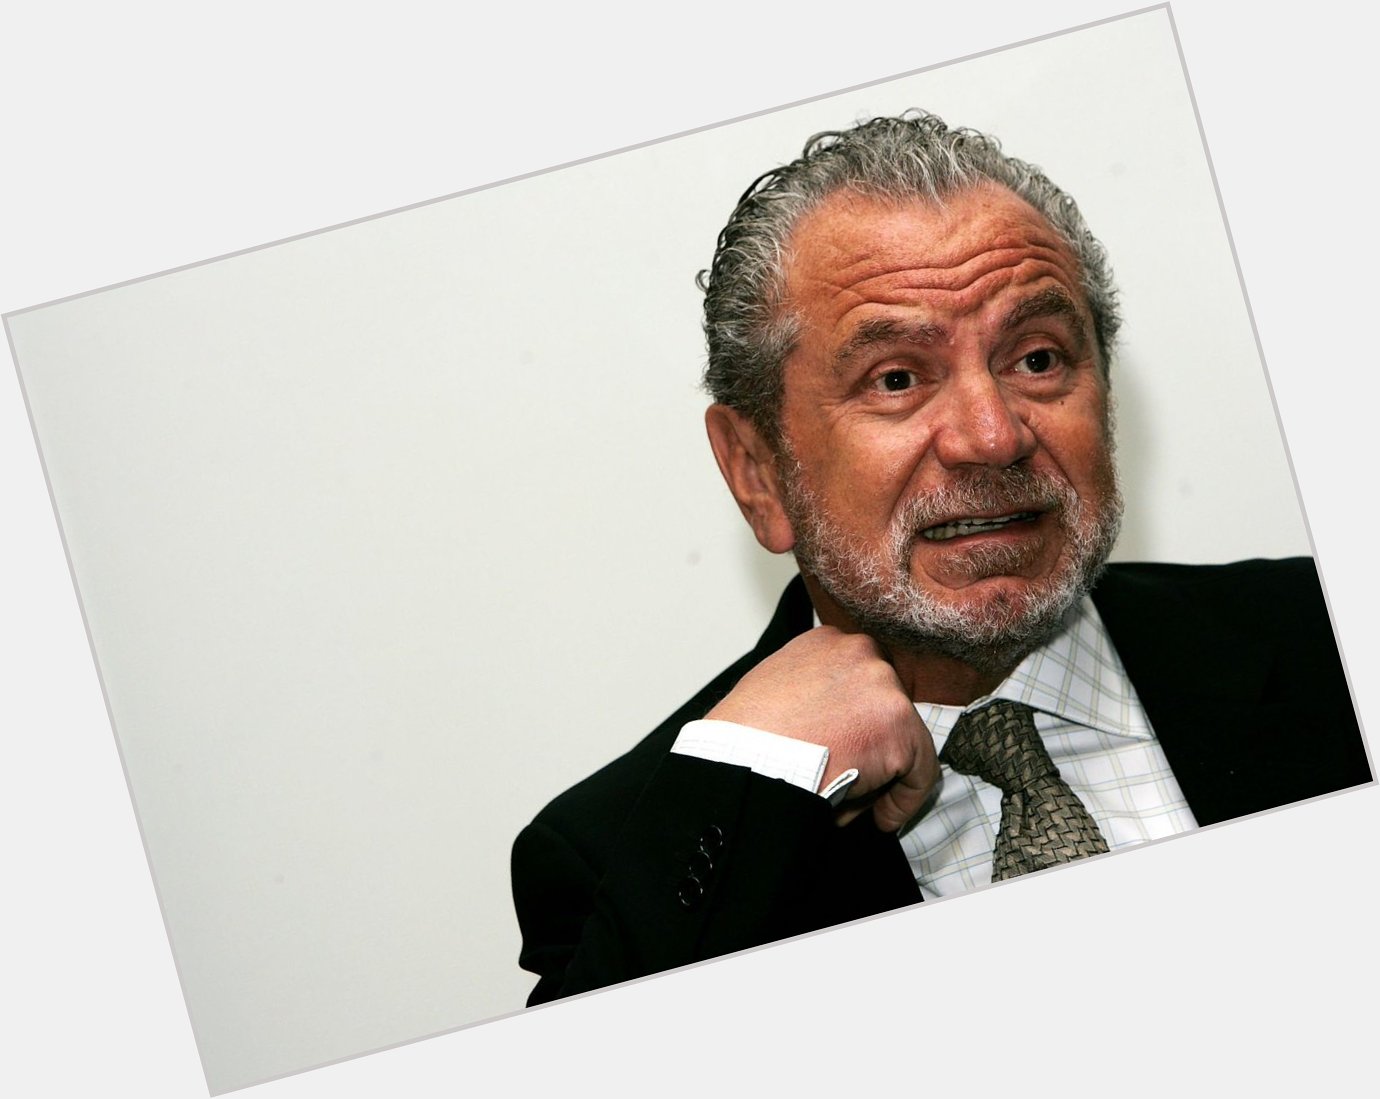 Lord Sugar just got tricked into saying \happy birthday\ to Harold Shipman  